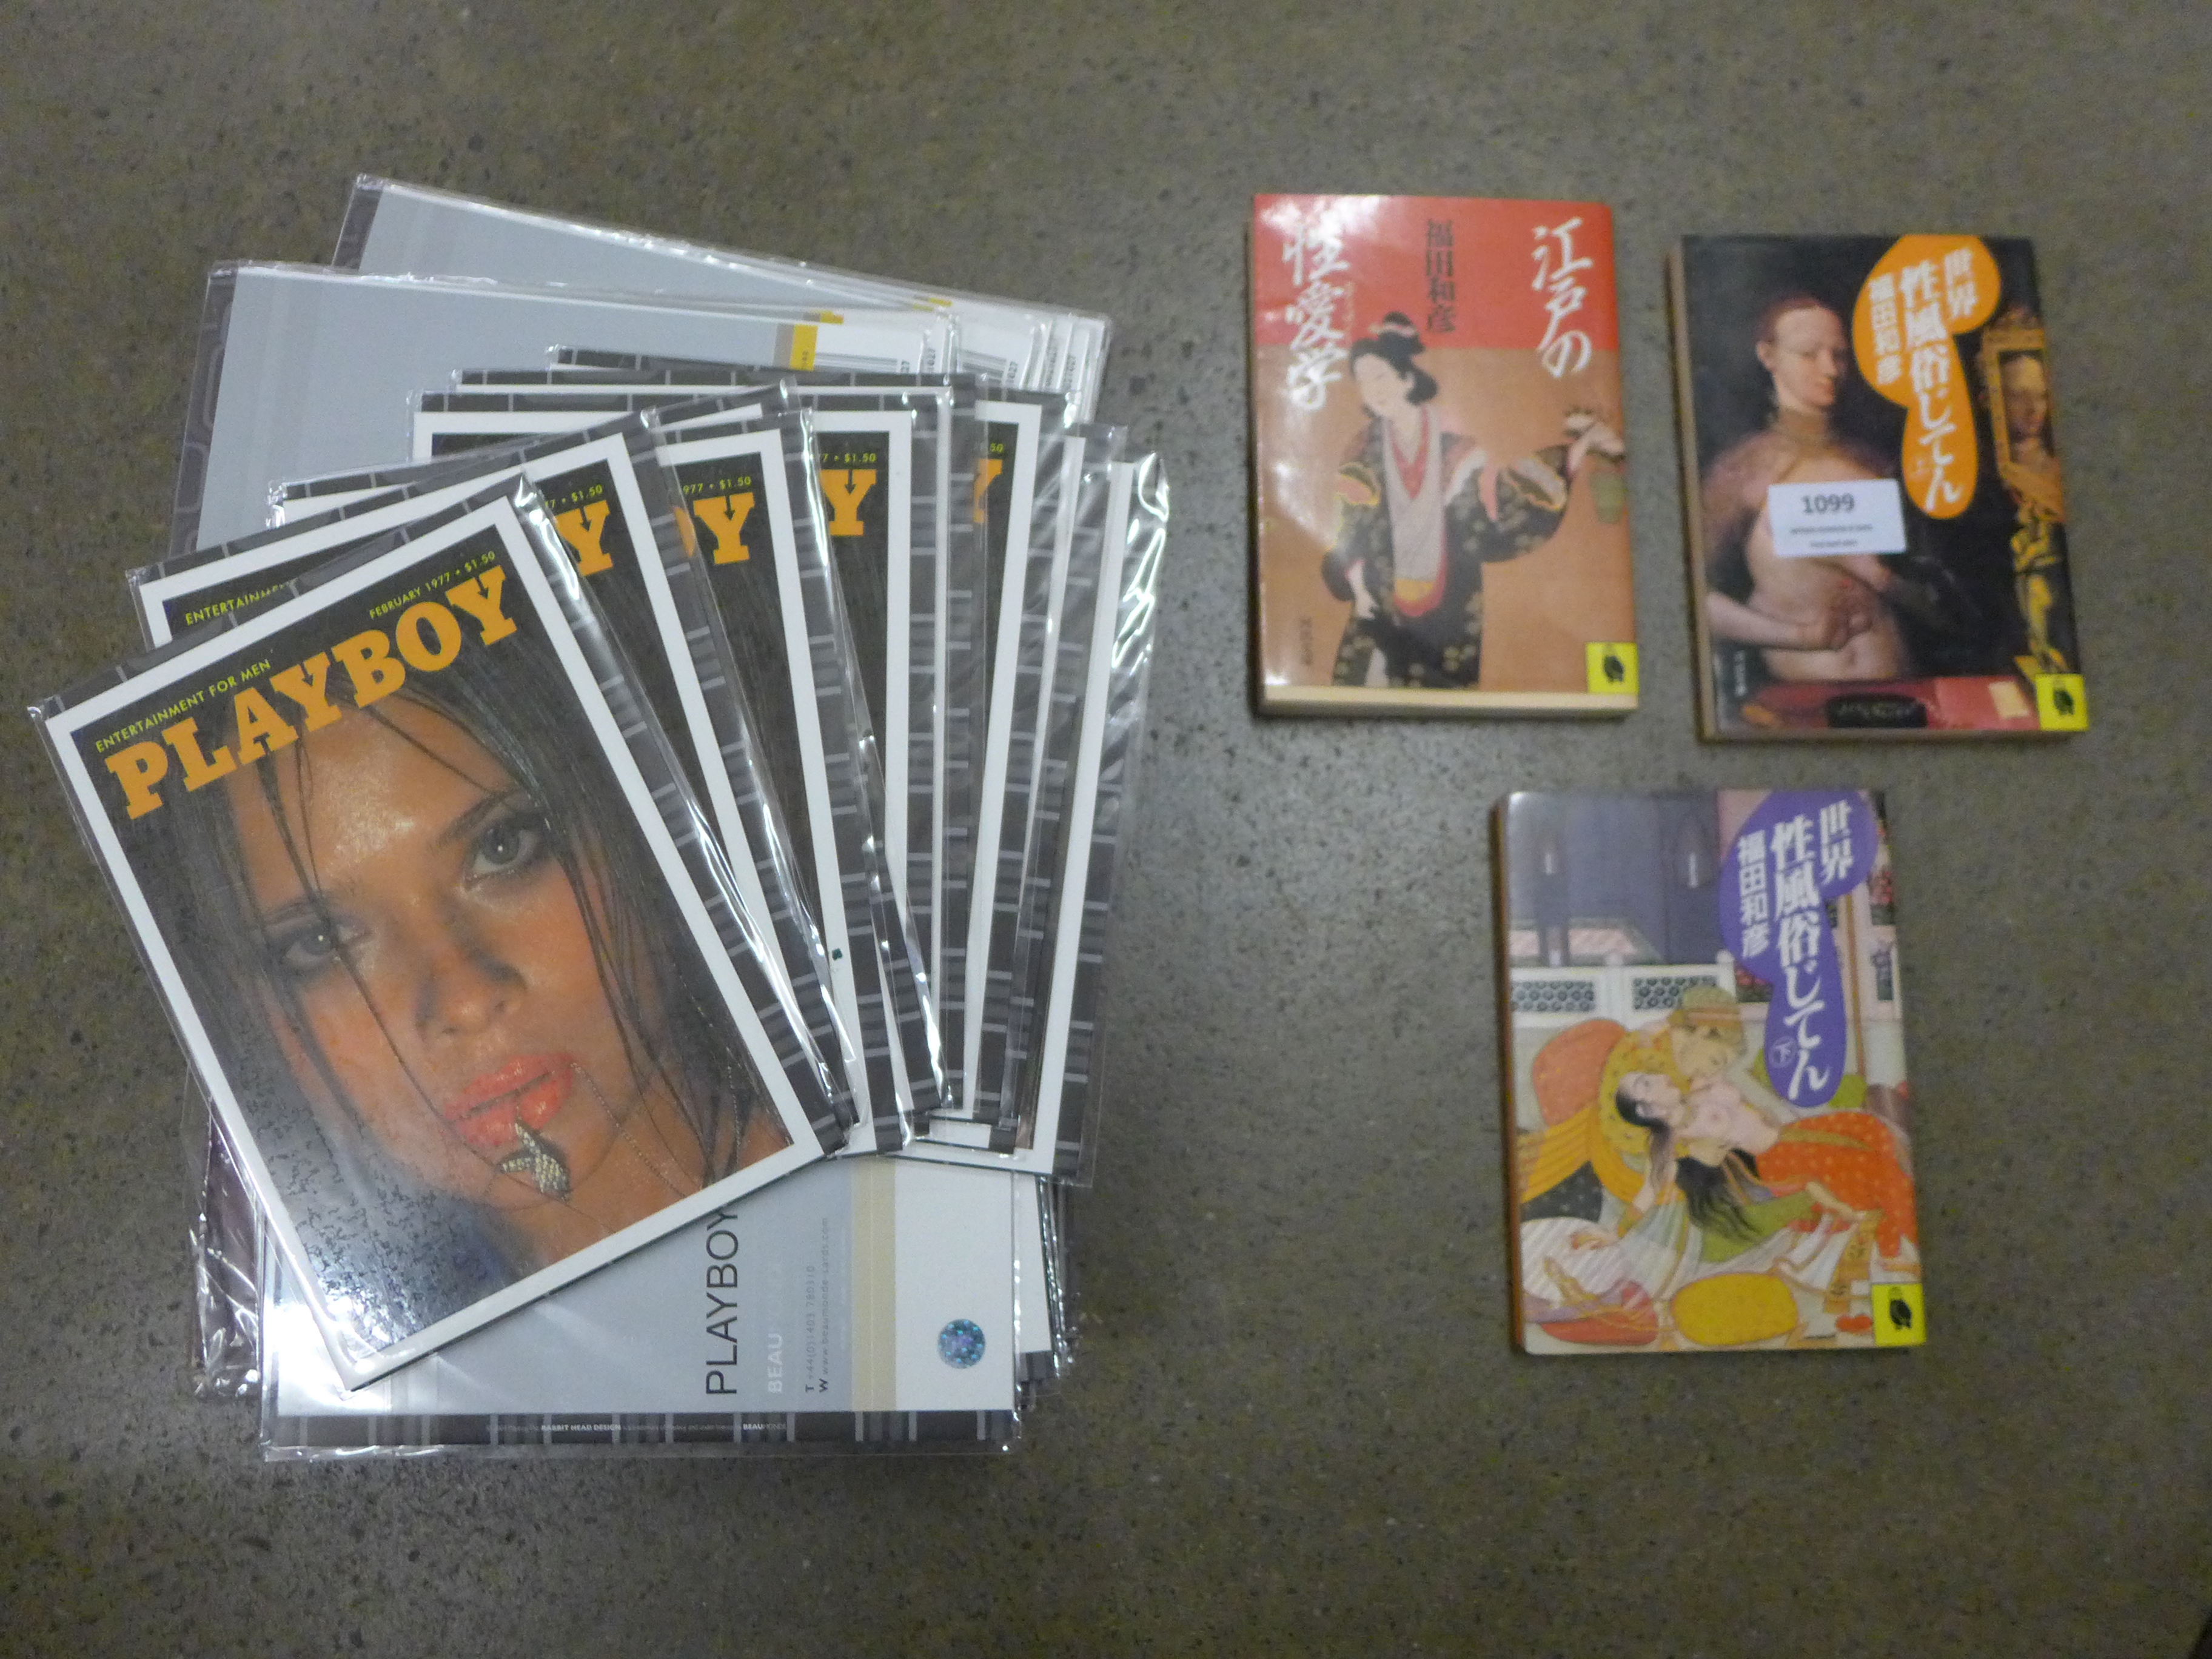 Two Playboy magazines, Playboy birthday cards and Japanese and Thai adult books